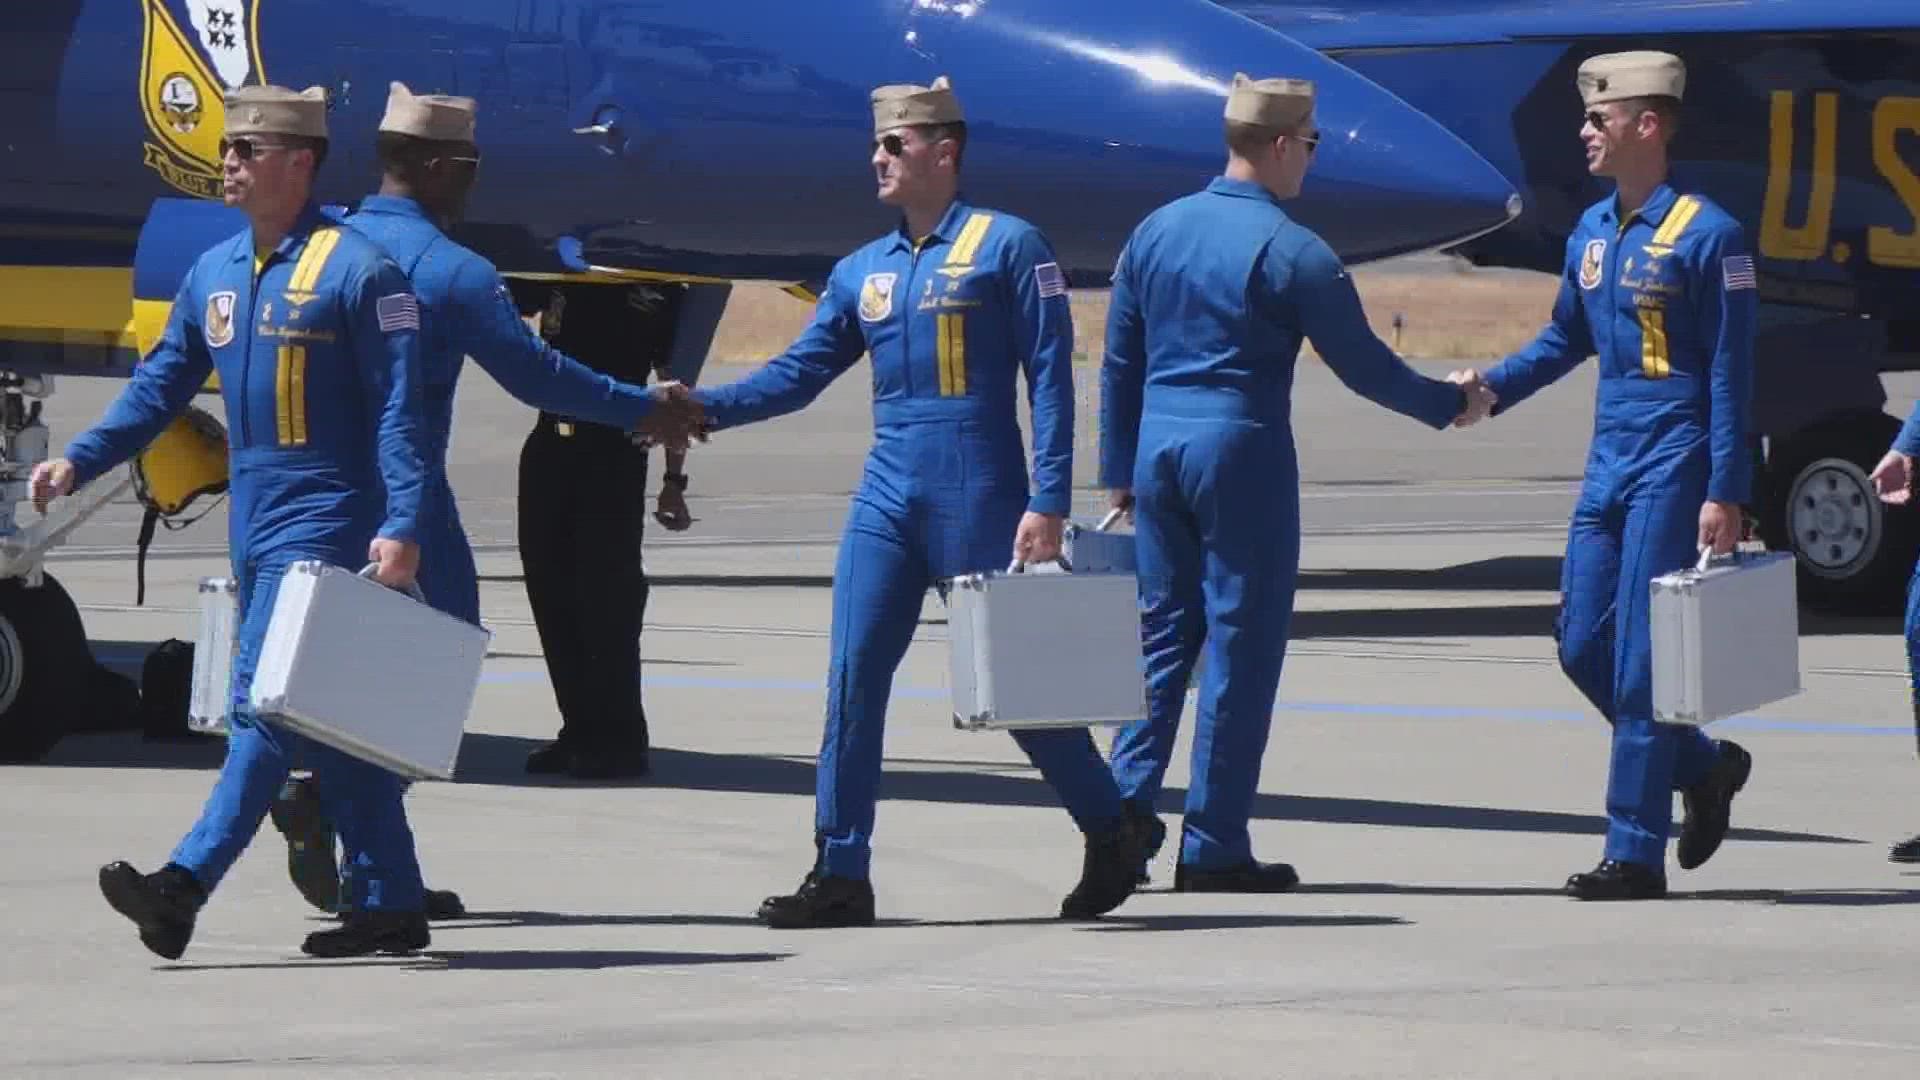 From the support team, to the pilots, a Blue Angels show is a team effort.